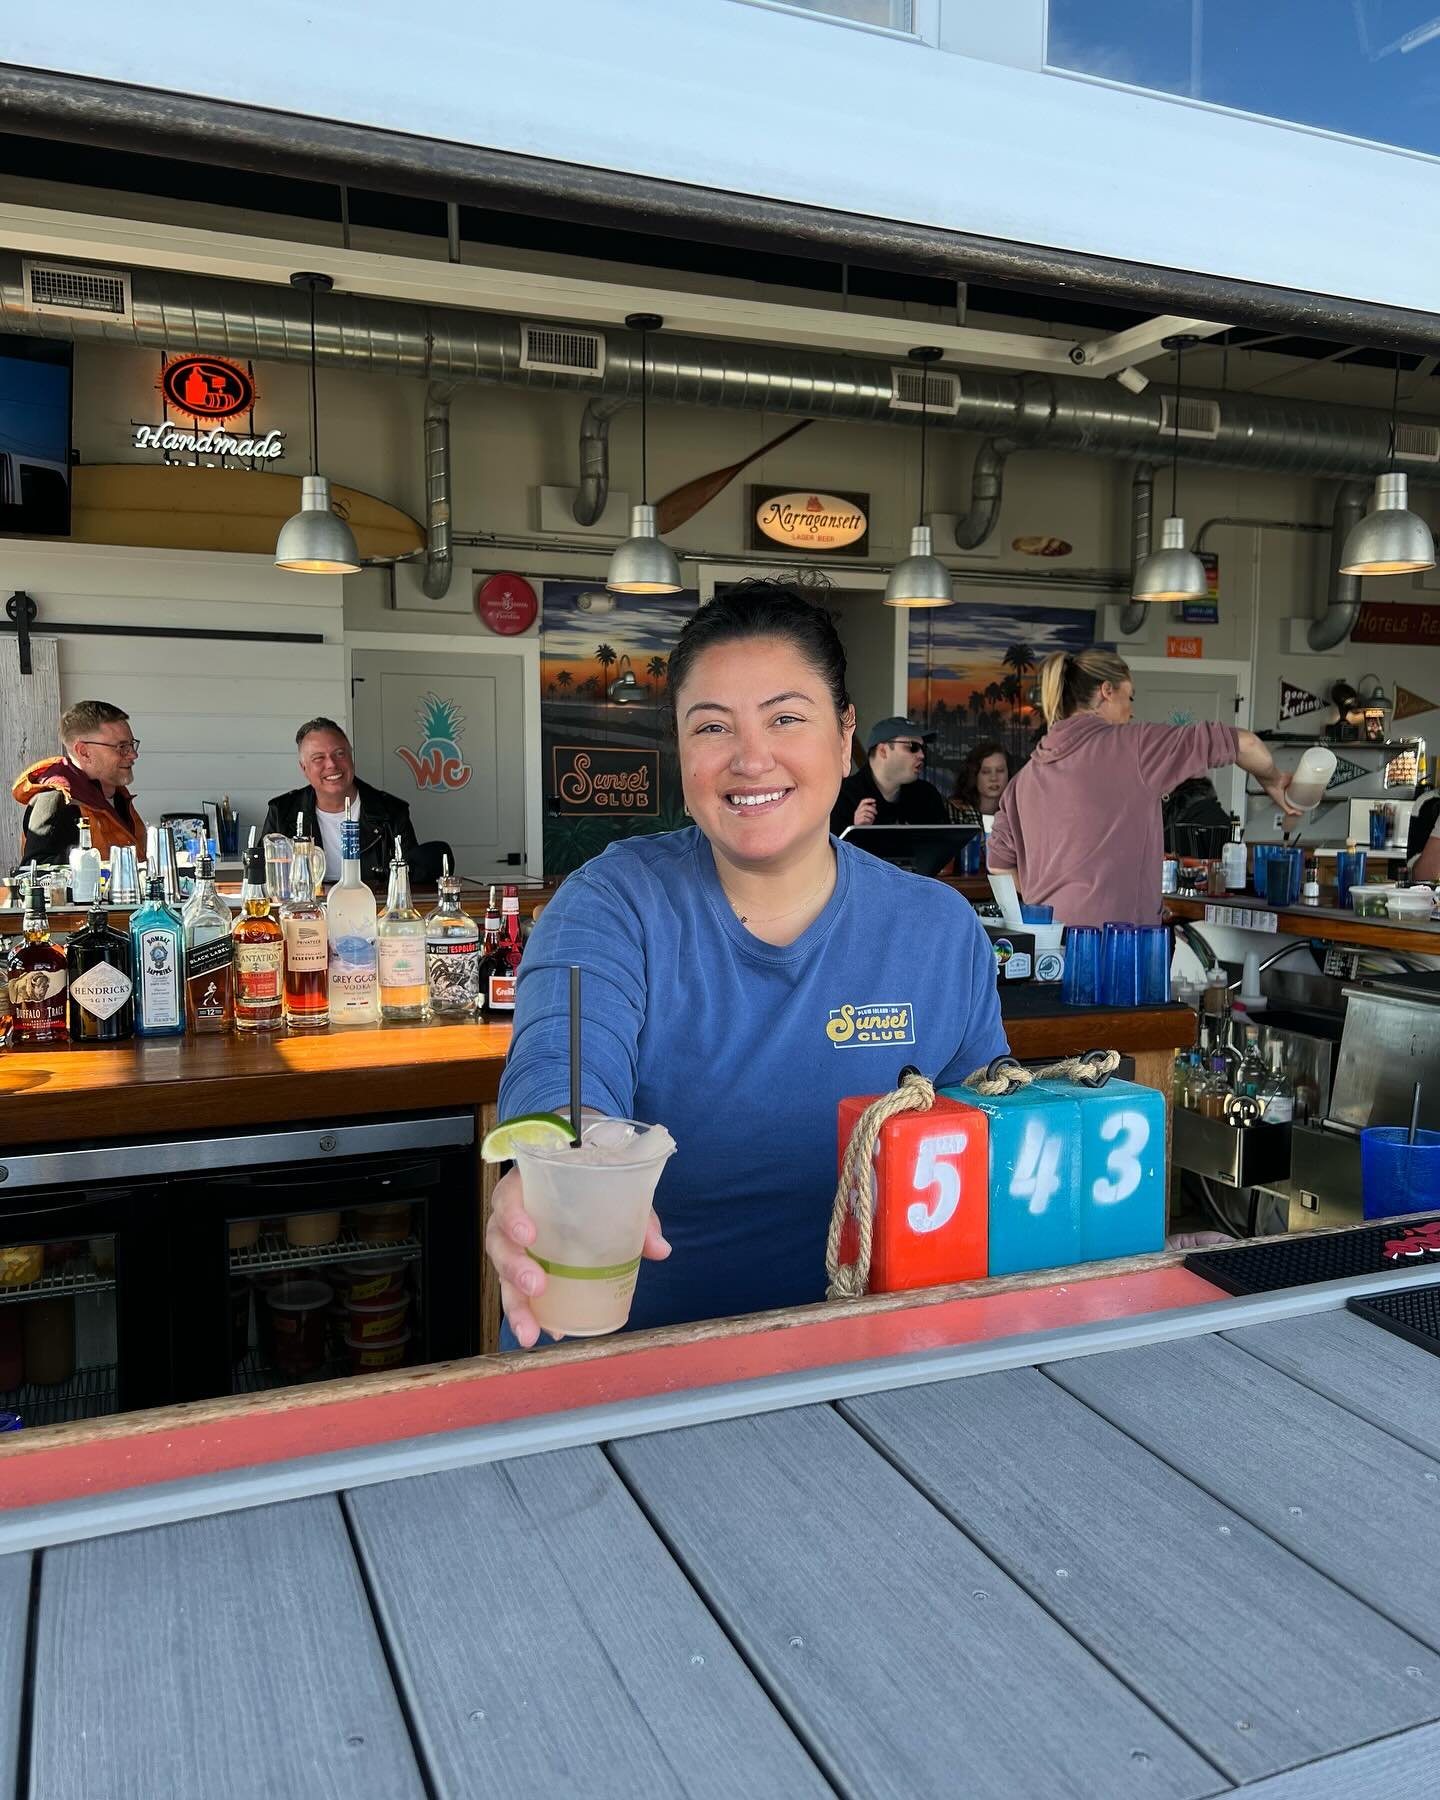 Our new bartender, Katie, is serving up cocktails and smiles for your sunset and Bruins viewing pleasure!  Kitchen &lsquo;til 9pm, bar &lsquo;til later! 
&bull;
&bull;
&bull;
#sunsetclub #plumisland #northshorema #beachbar #cocktails #gobruins